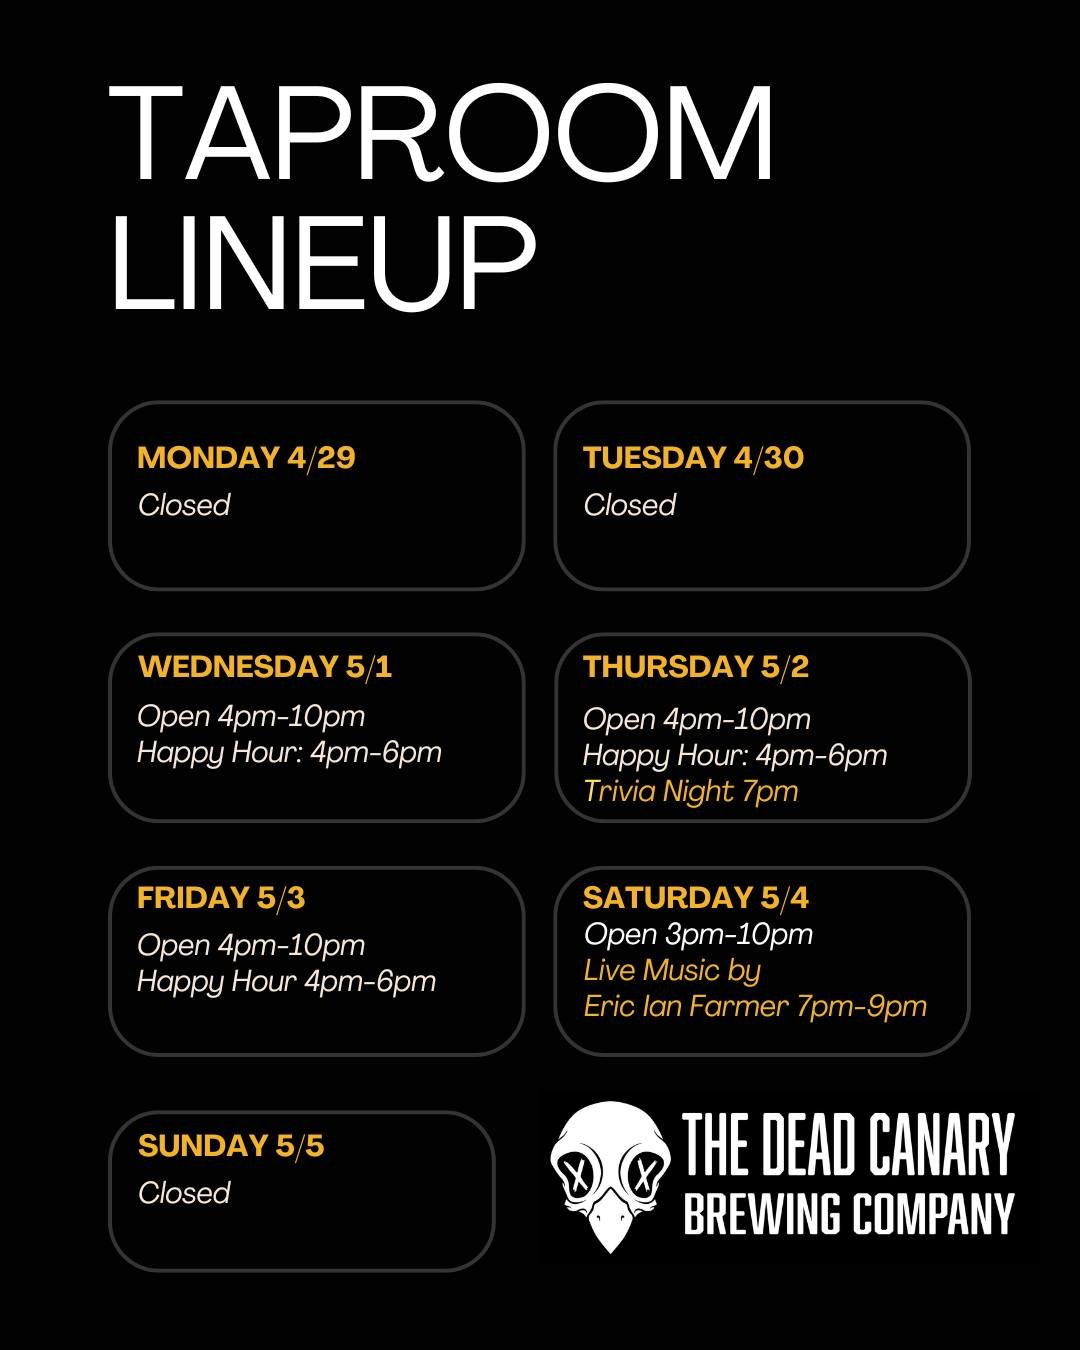 The weekly lineup has arrived! Join us in ringing in the month of May with Trivia on Thursday followed by live music by Eric Ian Farmer on Saturday! We'll also be running some Cinco de Mayo specials, so make sure you keep an eye out for those 👀 #cra